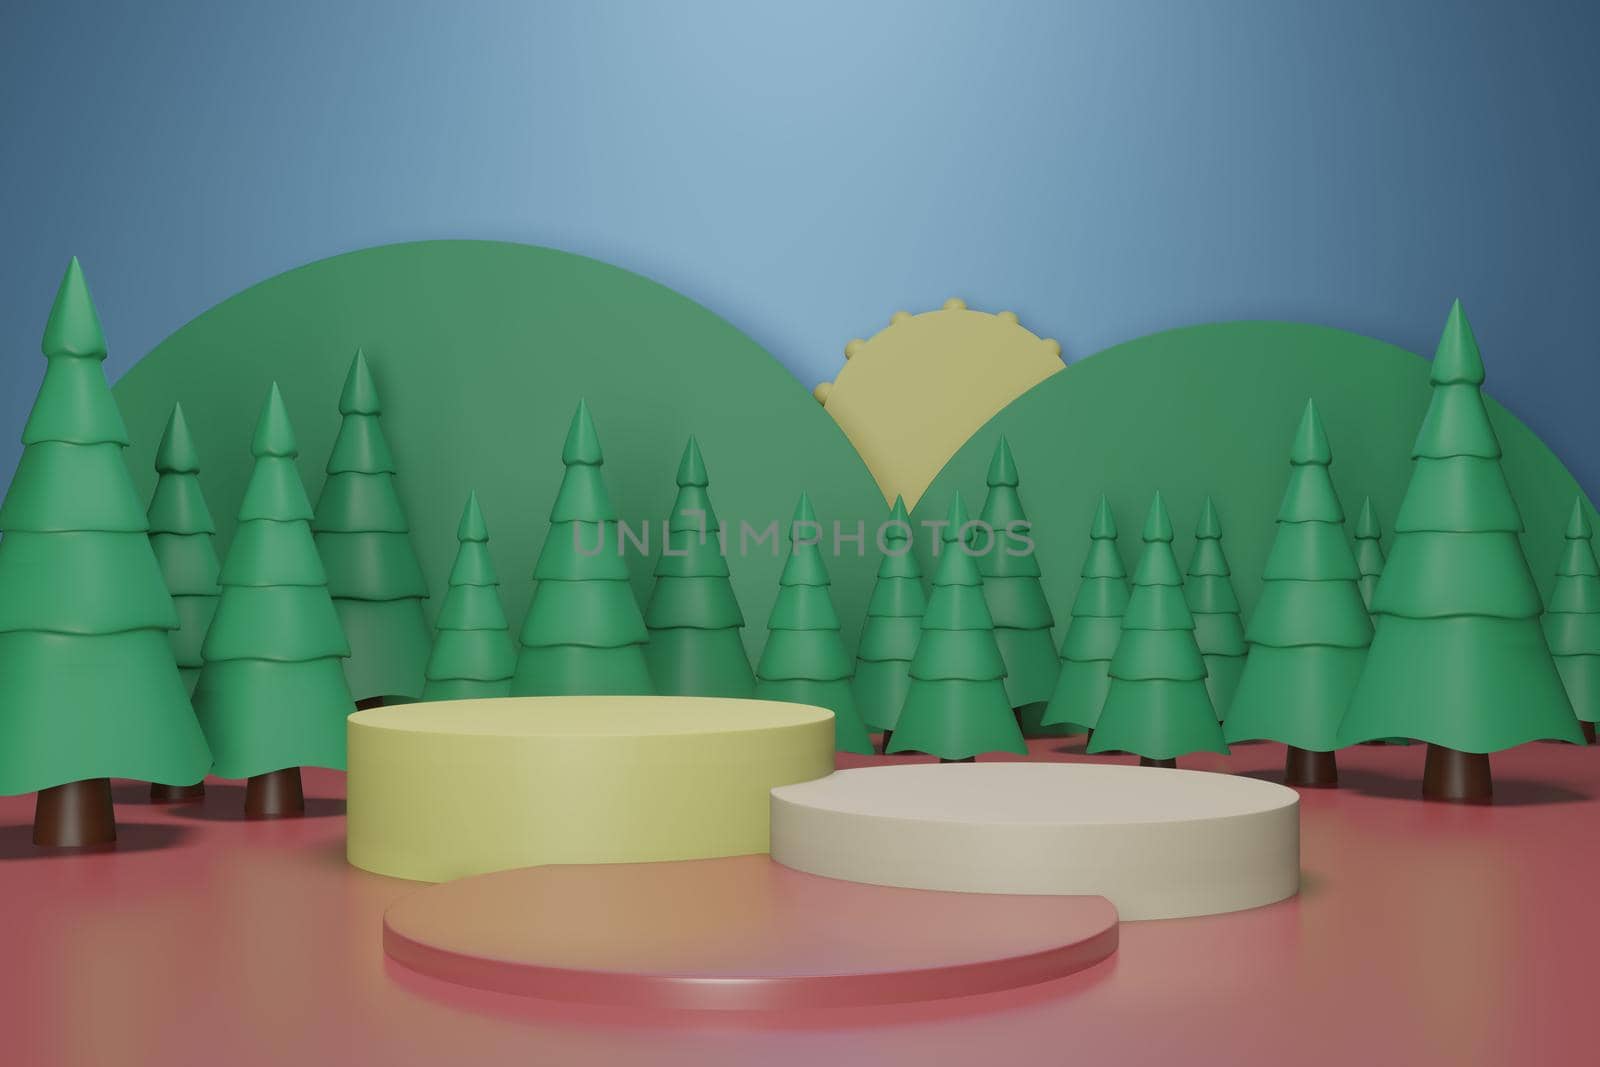 3d rendering illustration of podium for product placement in minimal design in christmas theme. podium stage showcase